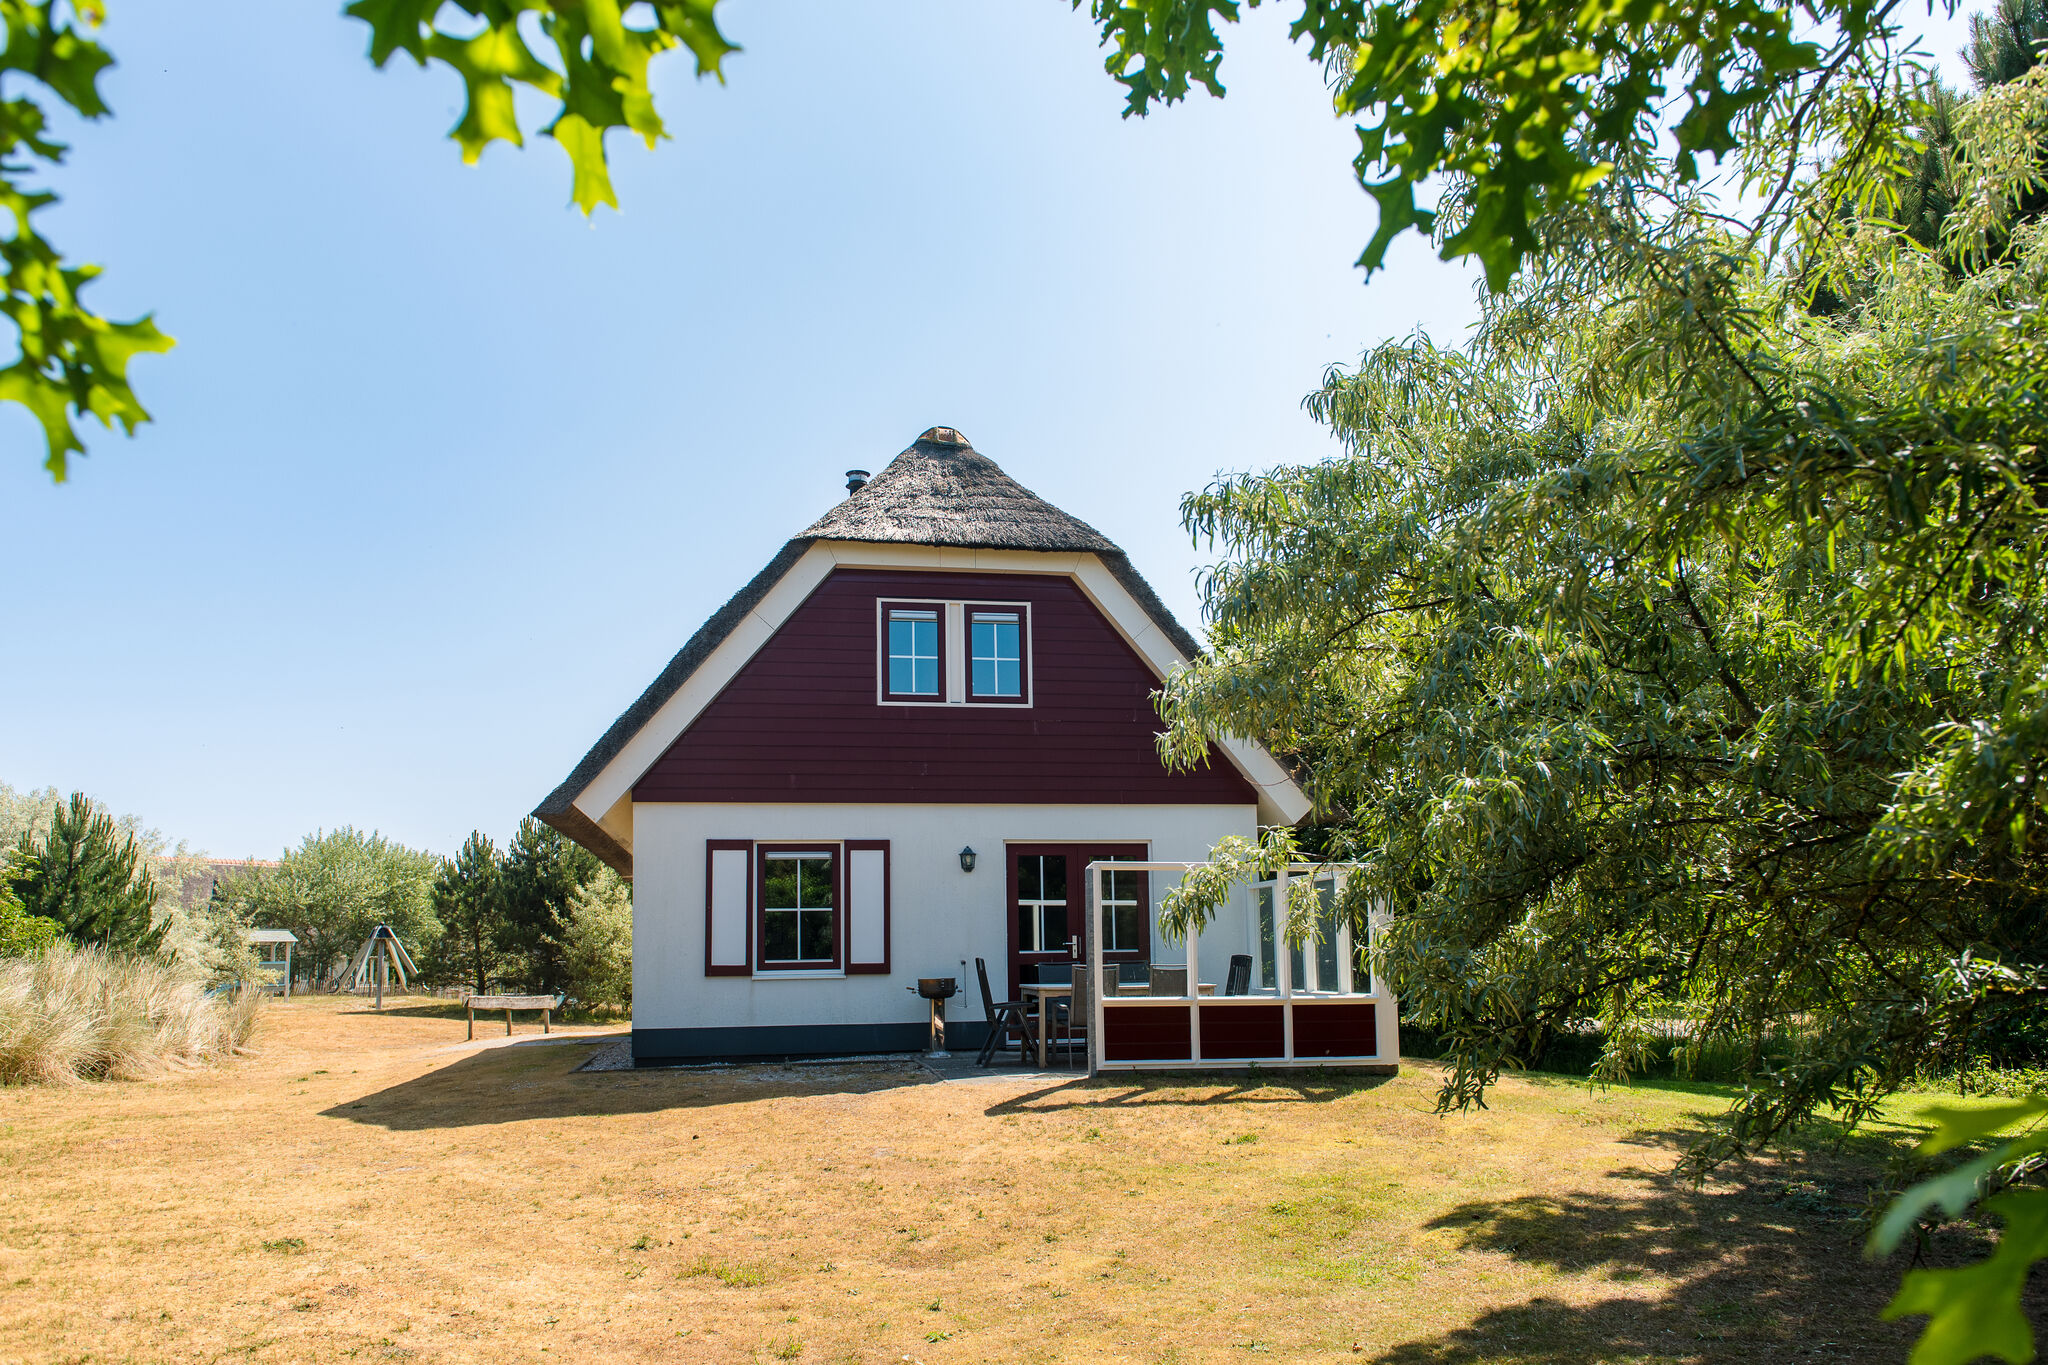 Thatched villa with dishwasher, 1.5 km. from the beach